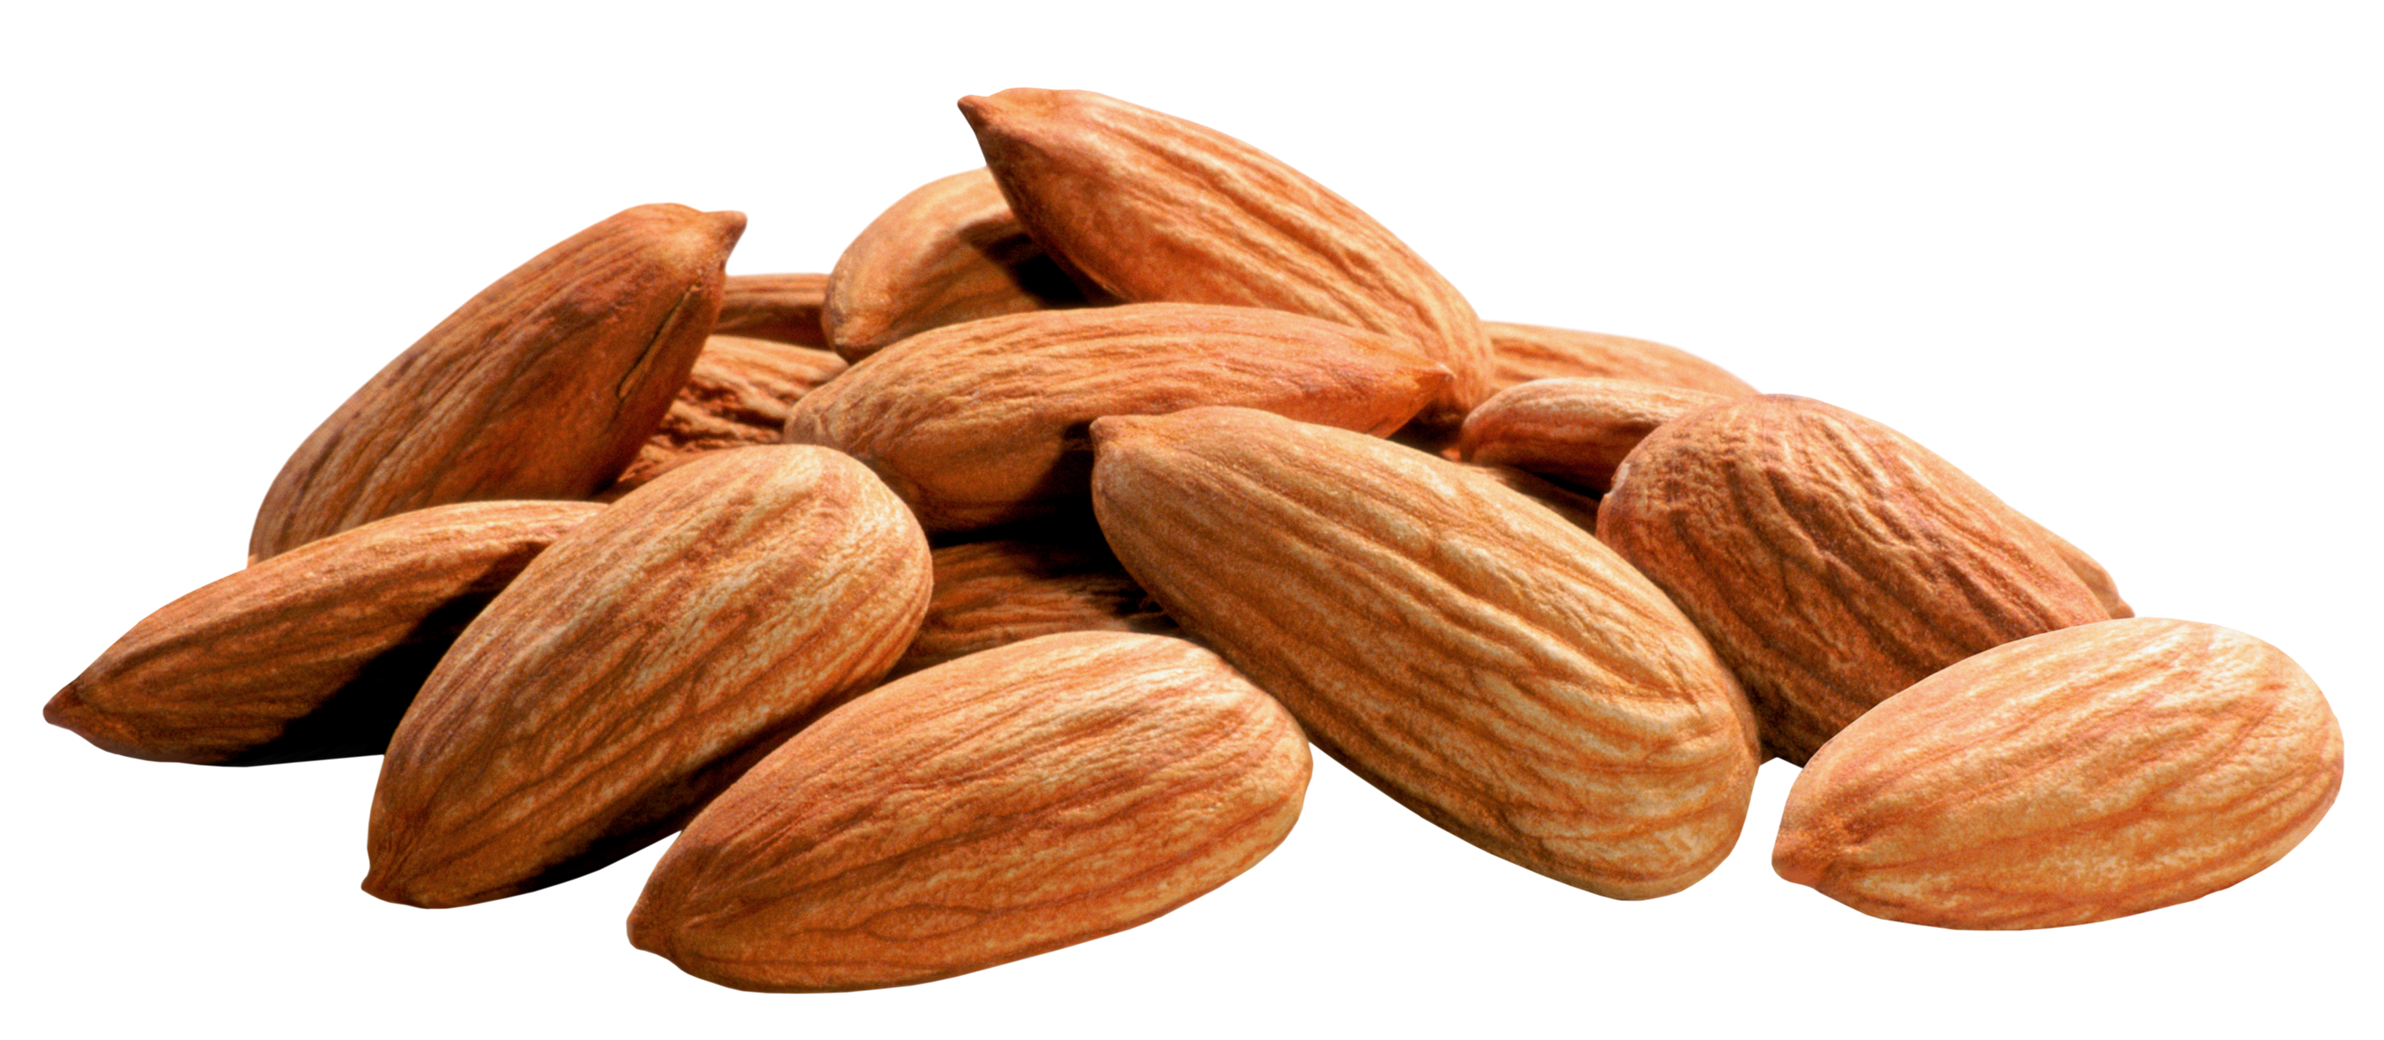 Nut Almond Pic Free Download Image PNG Image